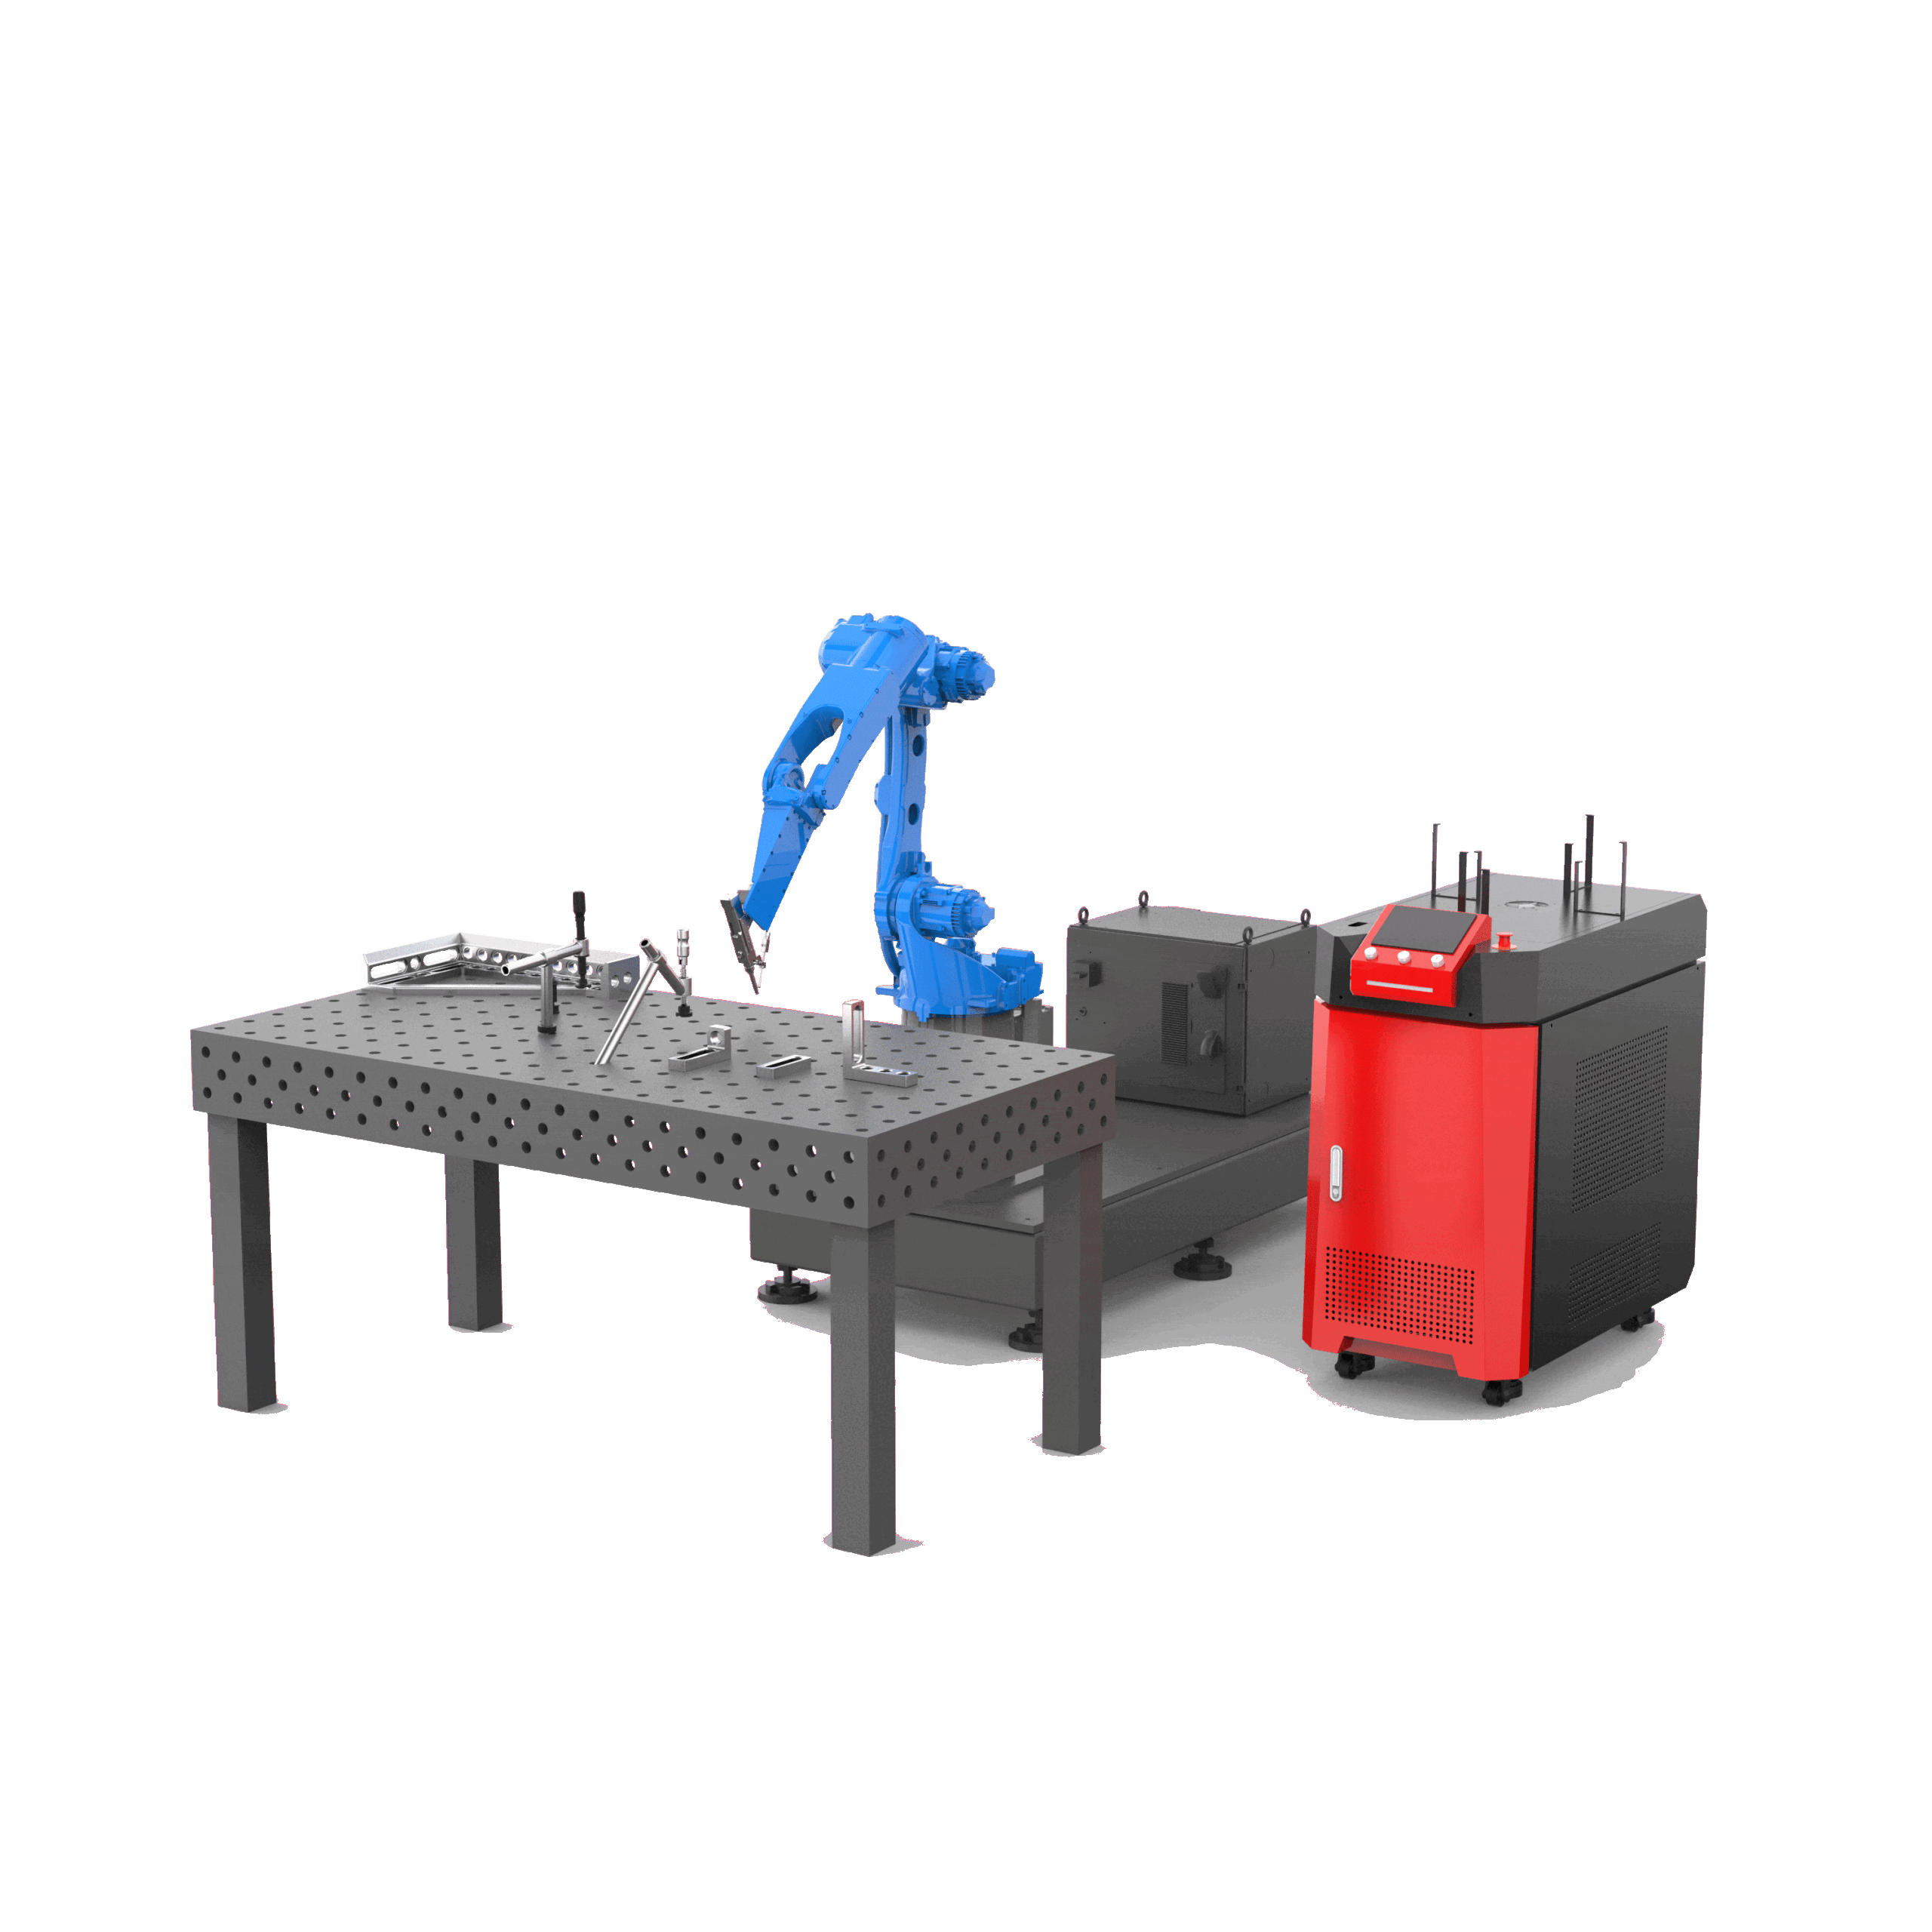 industrial robot welding workstation scaled.gif